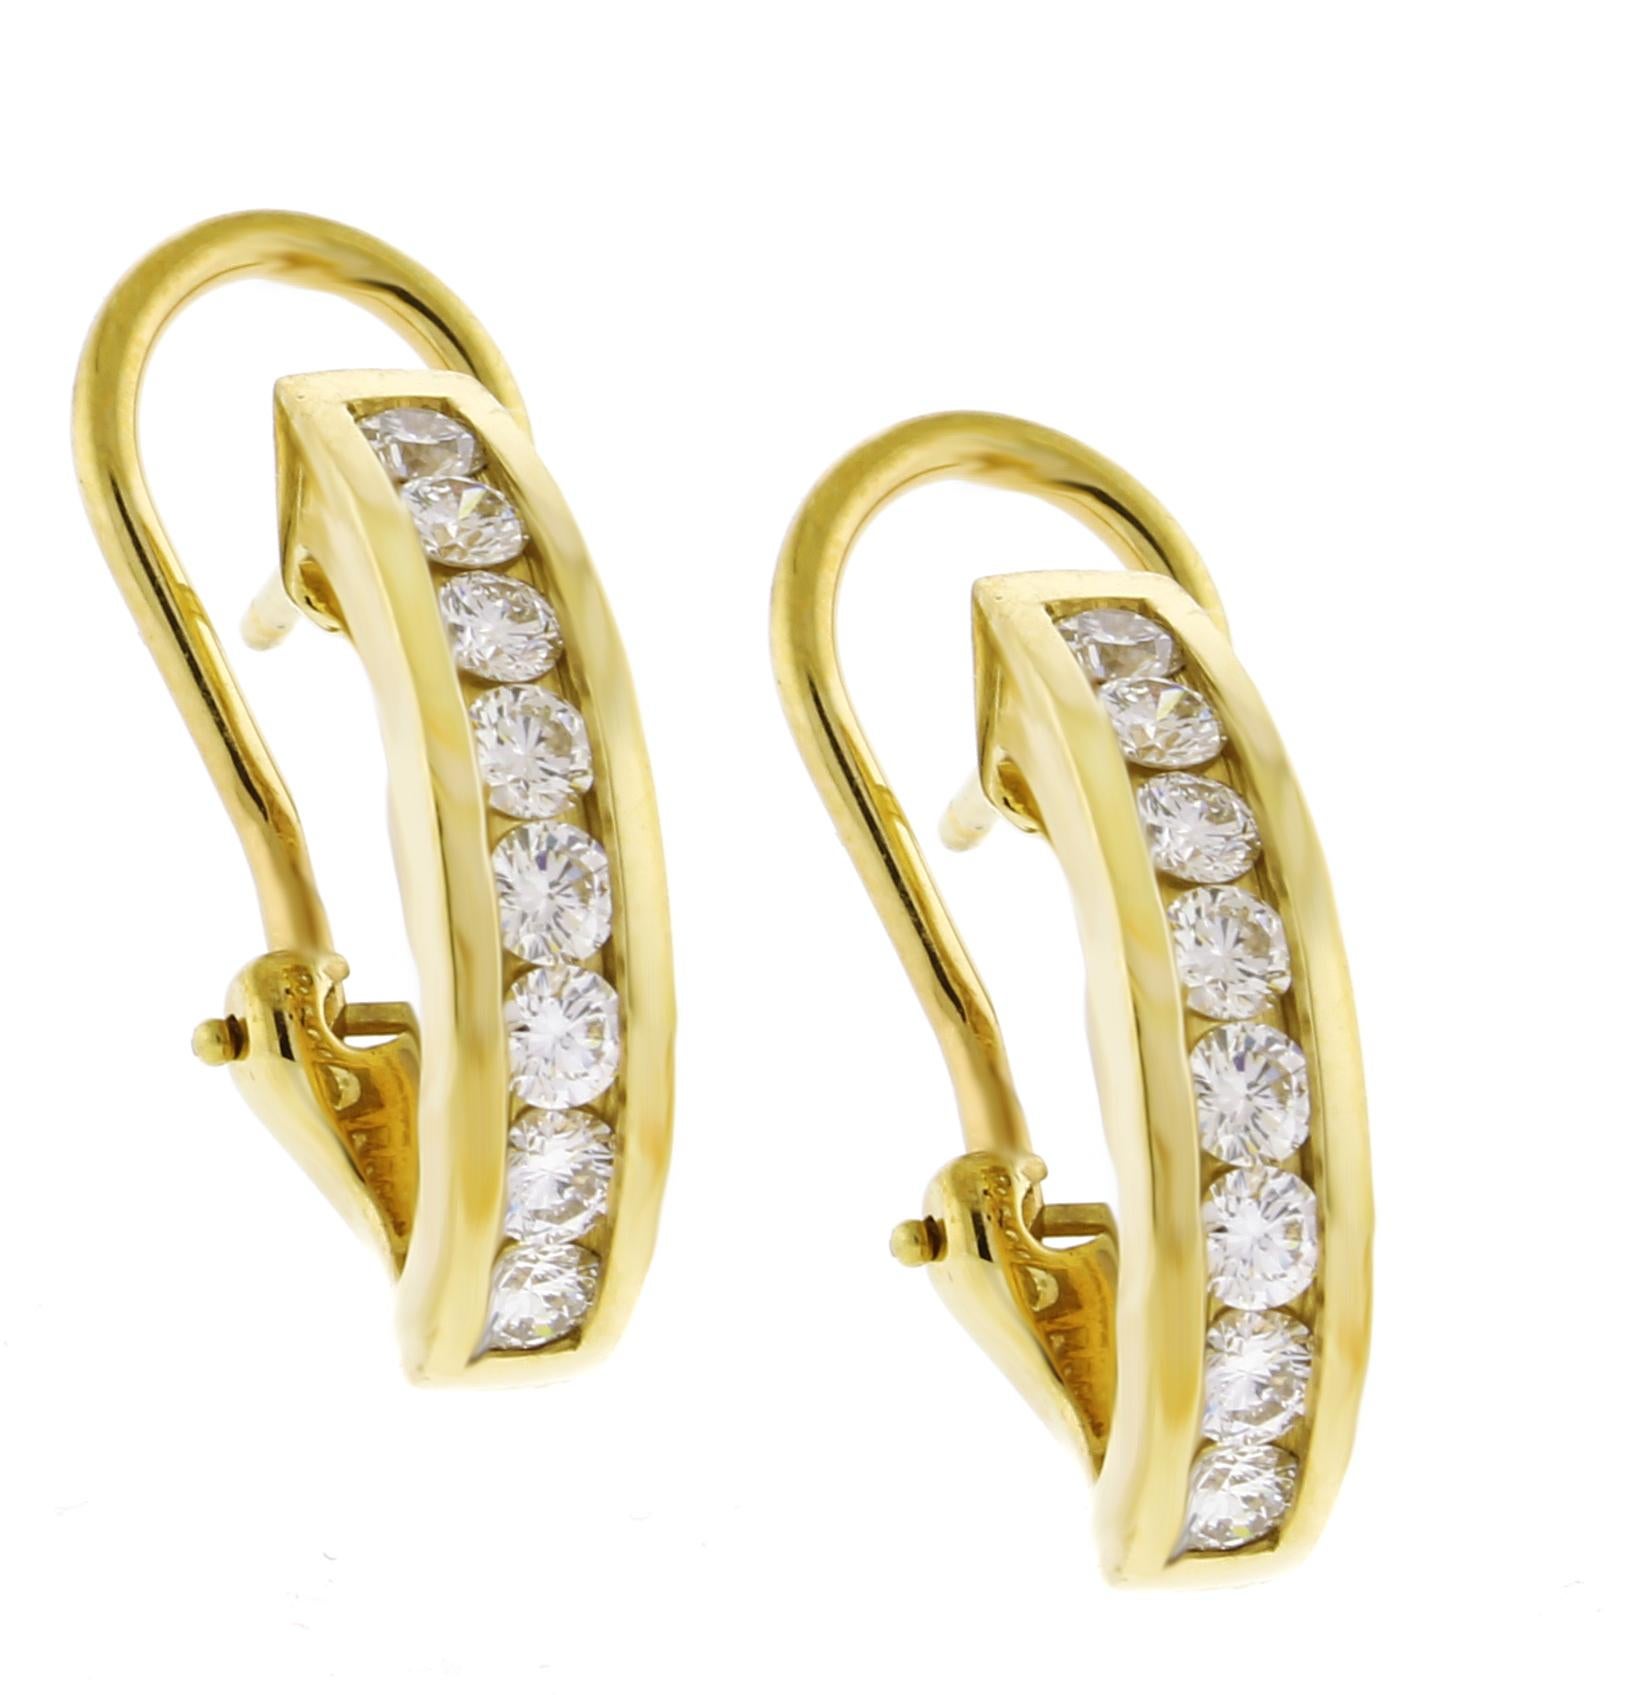 Tiffany & Co. 18kt Gold Hoop Earrings In Excellent Condition For Sale In Bethesda, MD